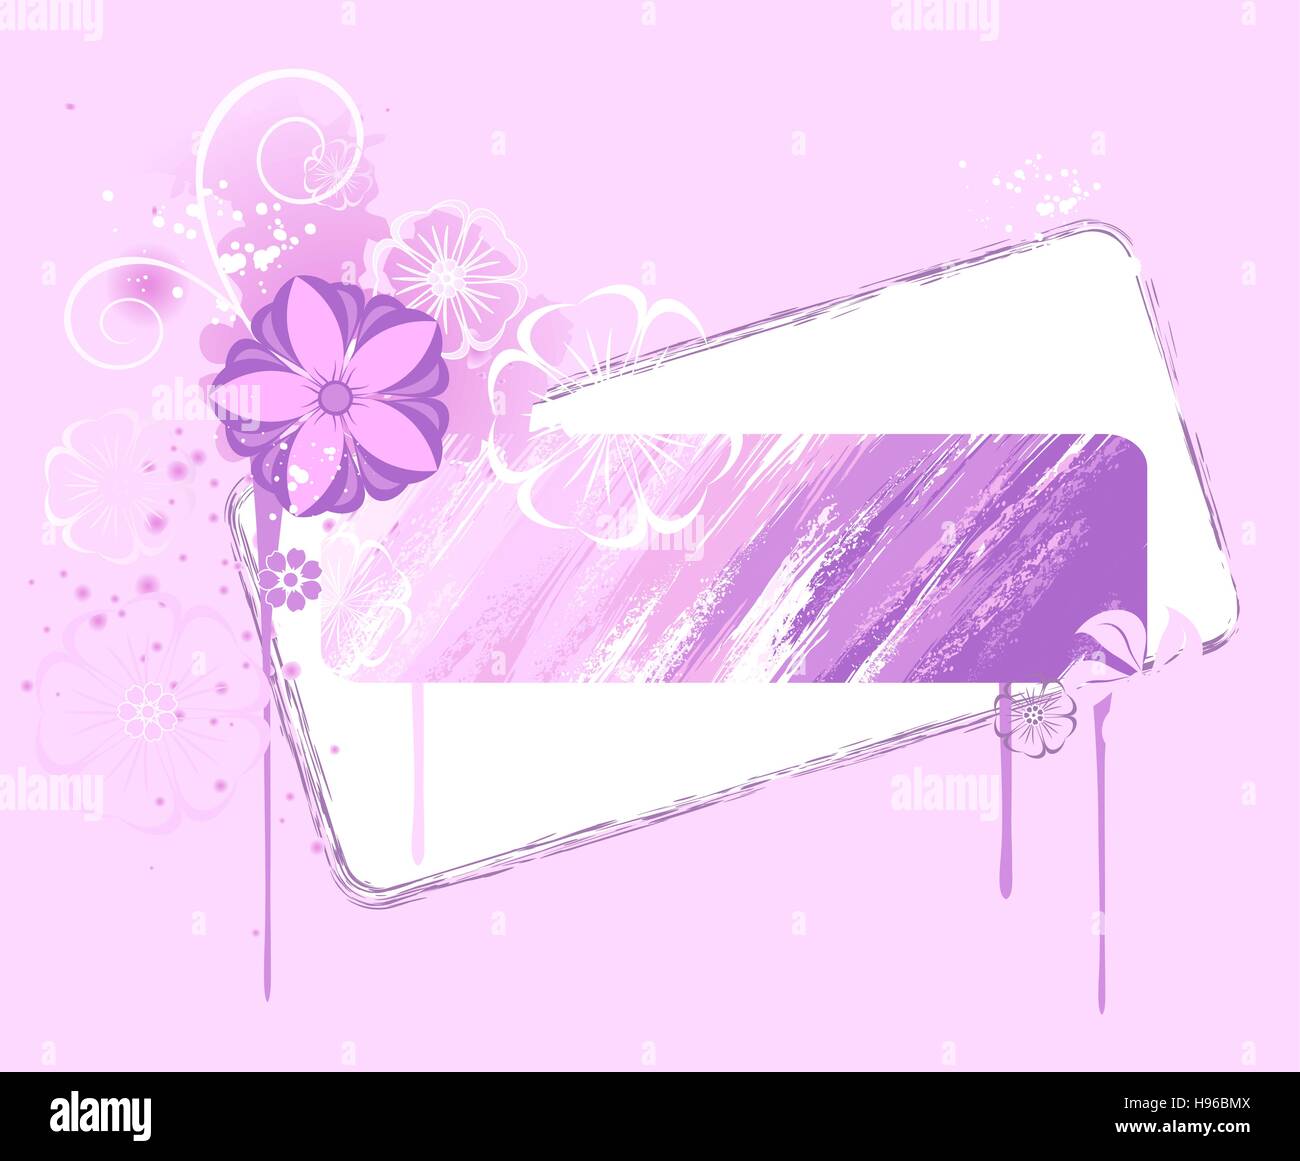 original banner, painted various shades of pink paint, decorated with stylized flowers and drips of paint. Stock Vector